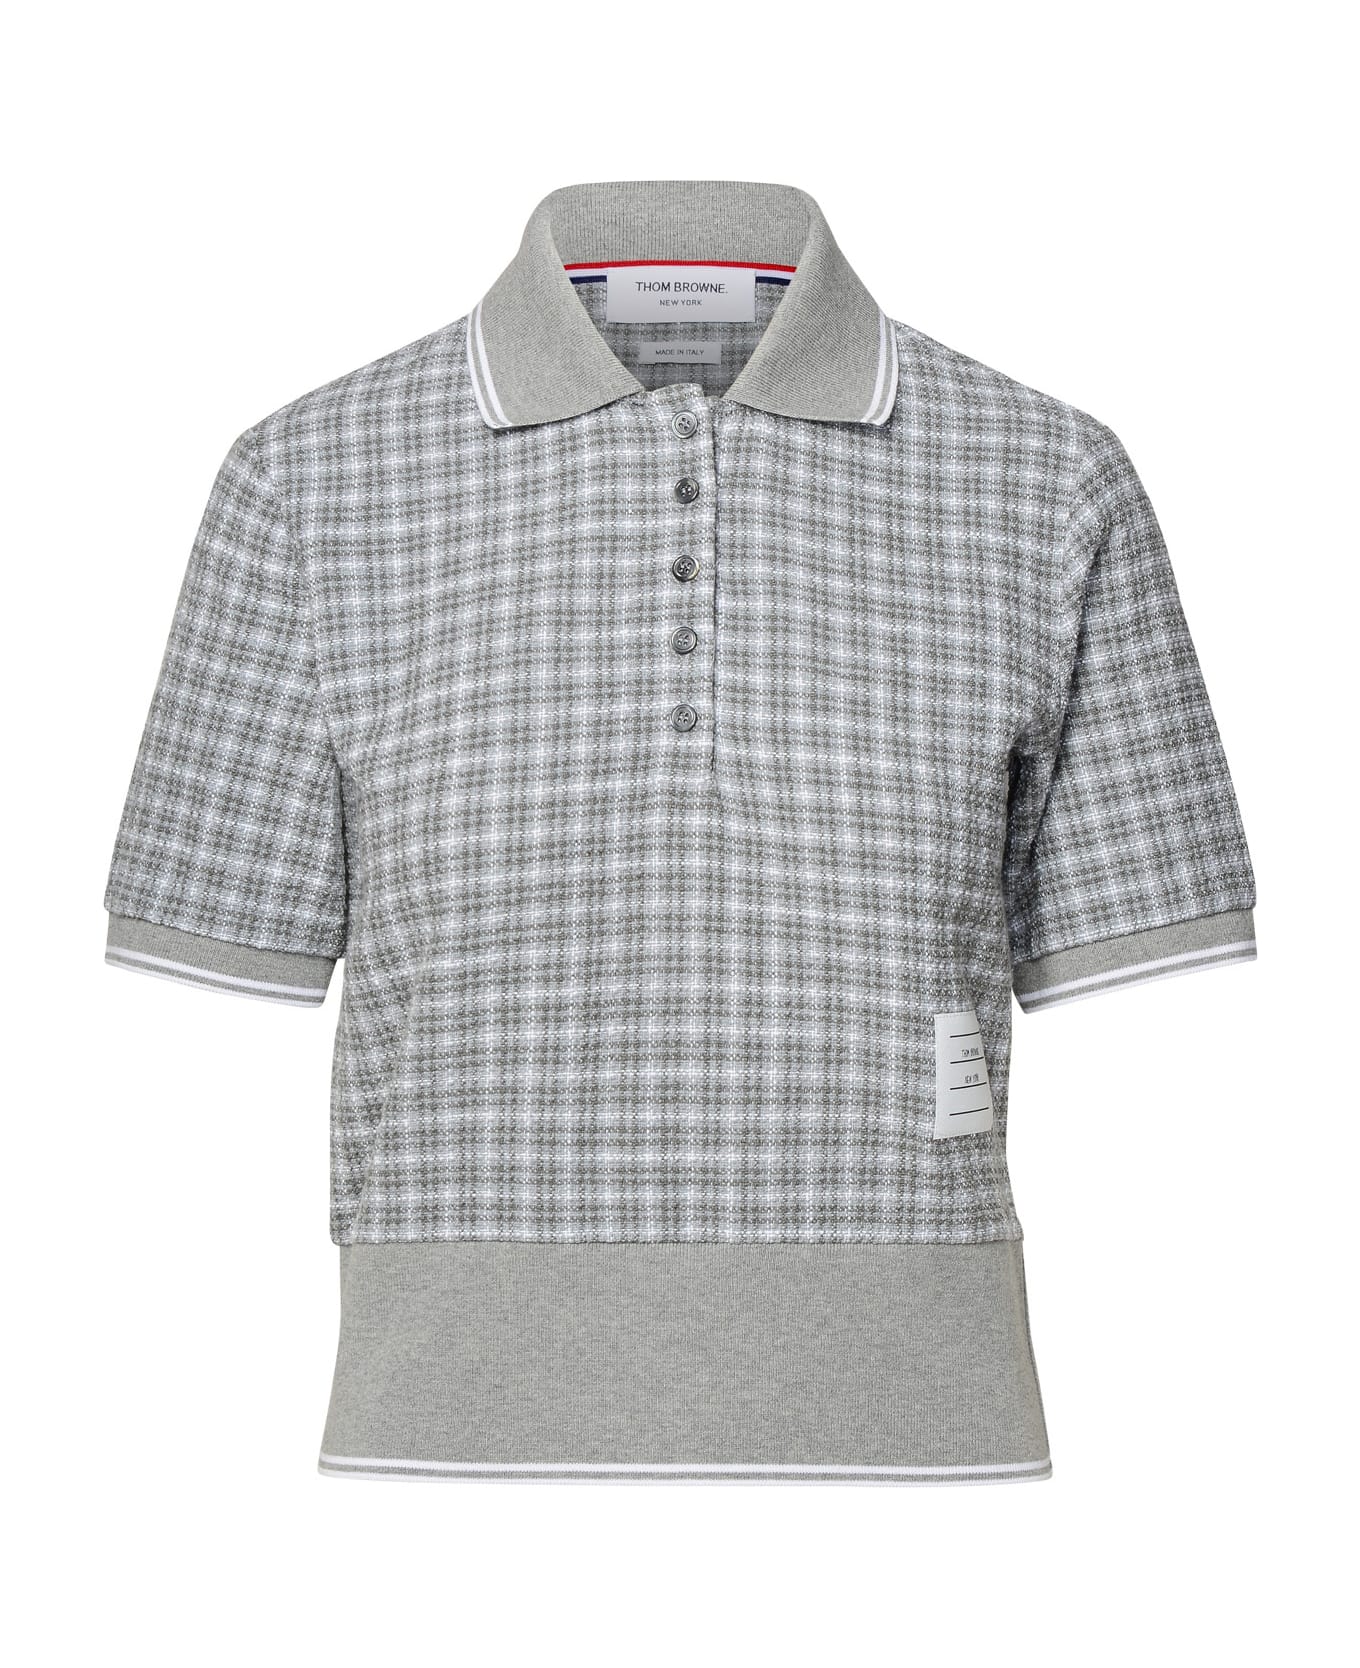 Thom Browne Grey Cotton Blend Polo Shirt - MED GREY